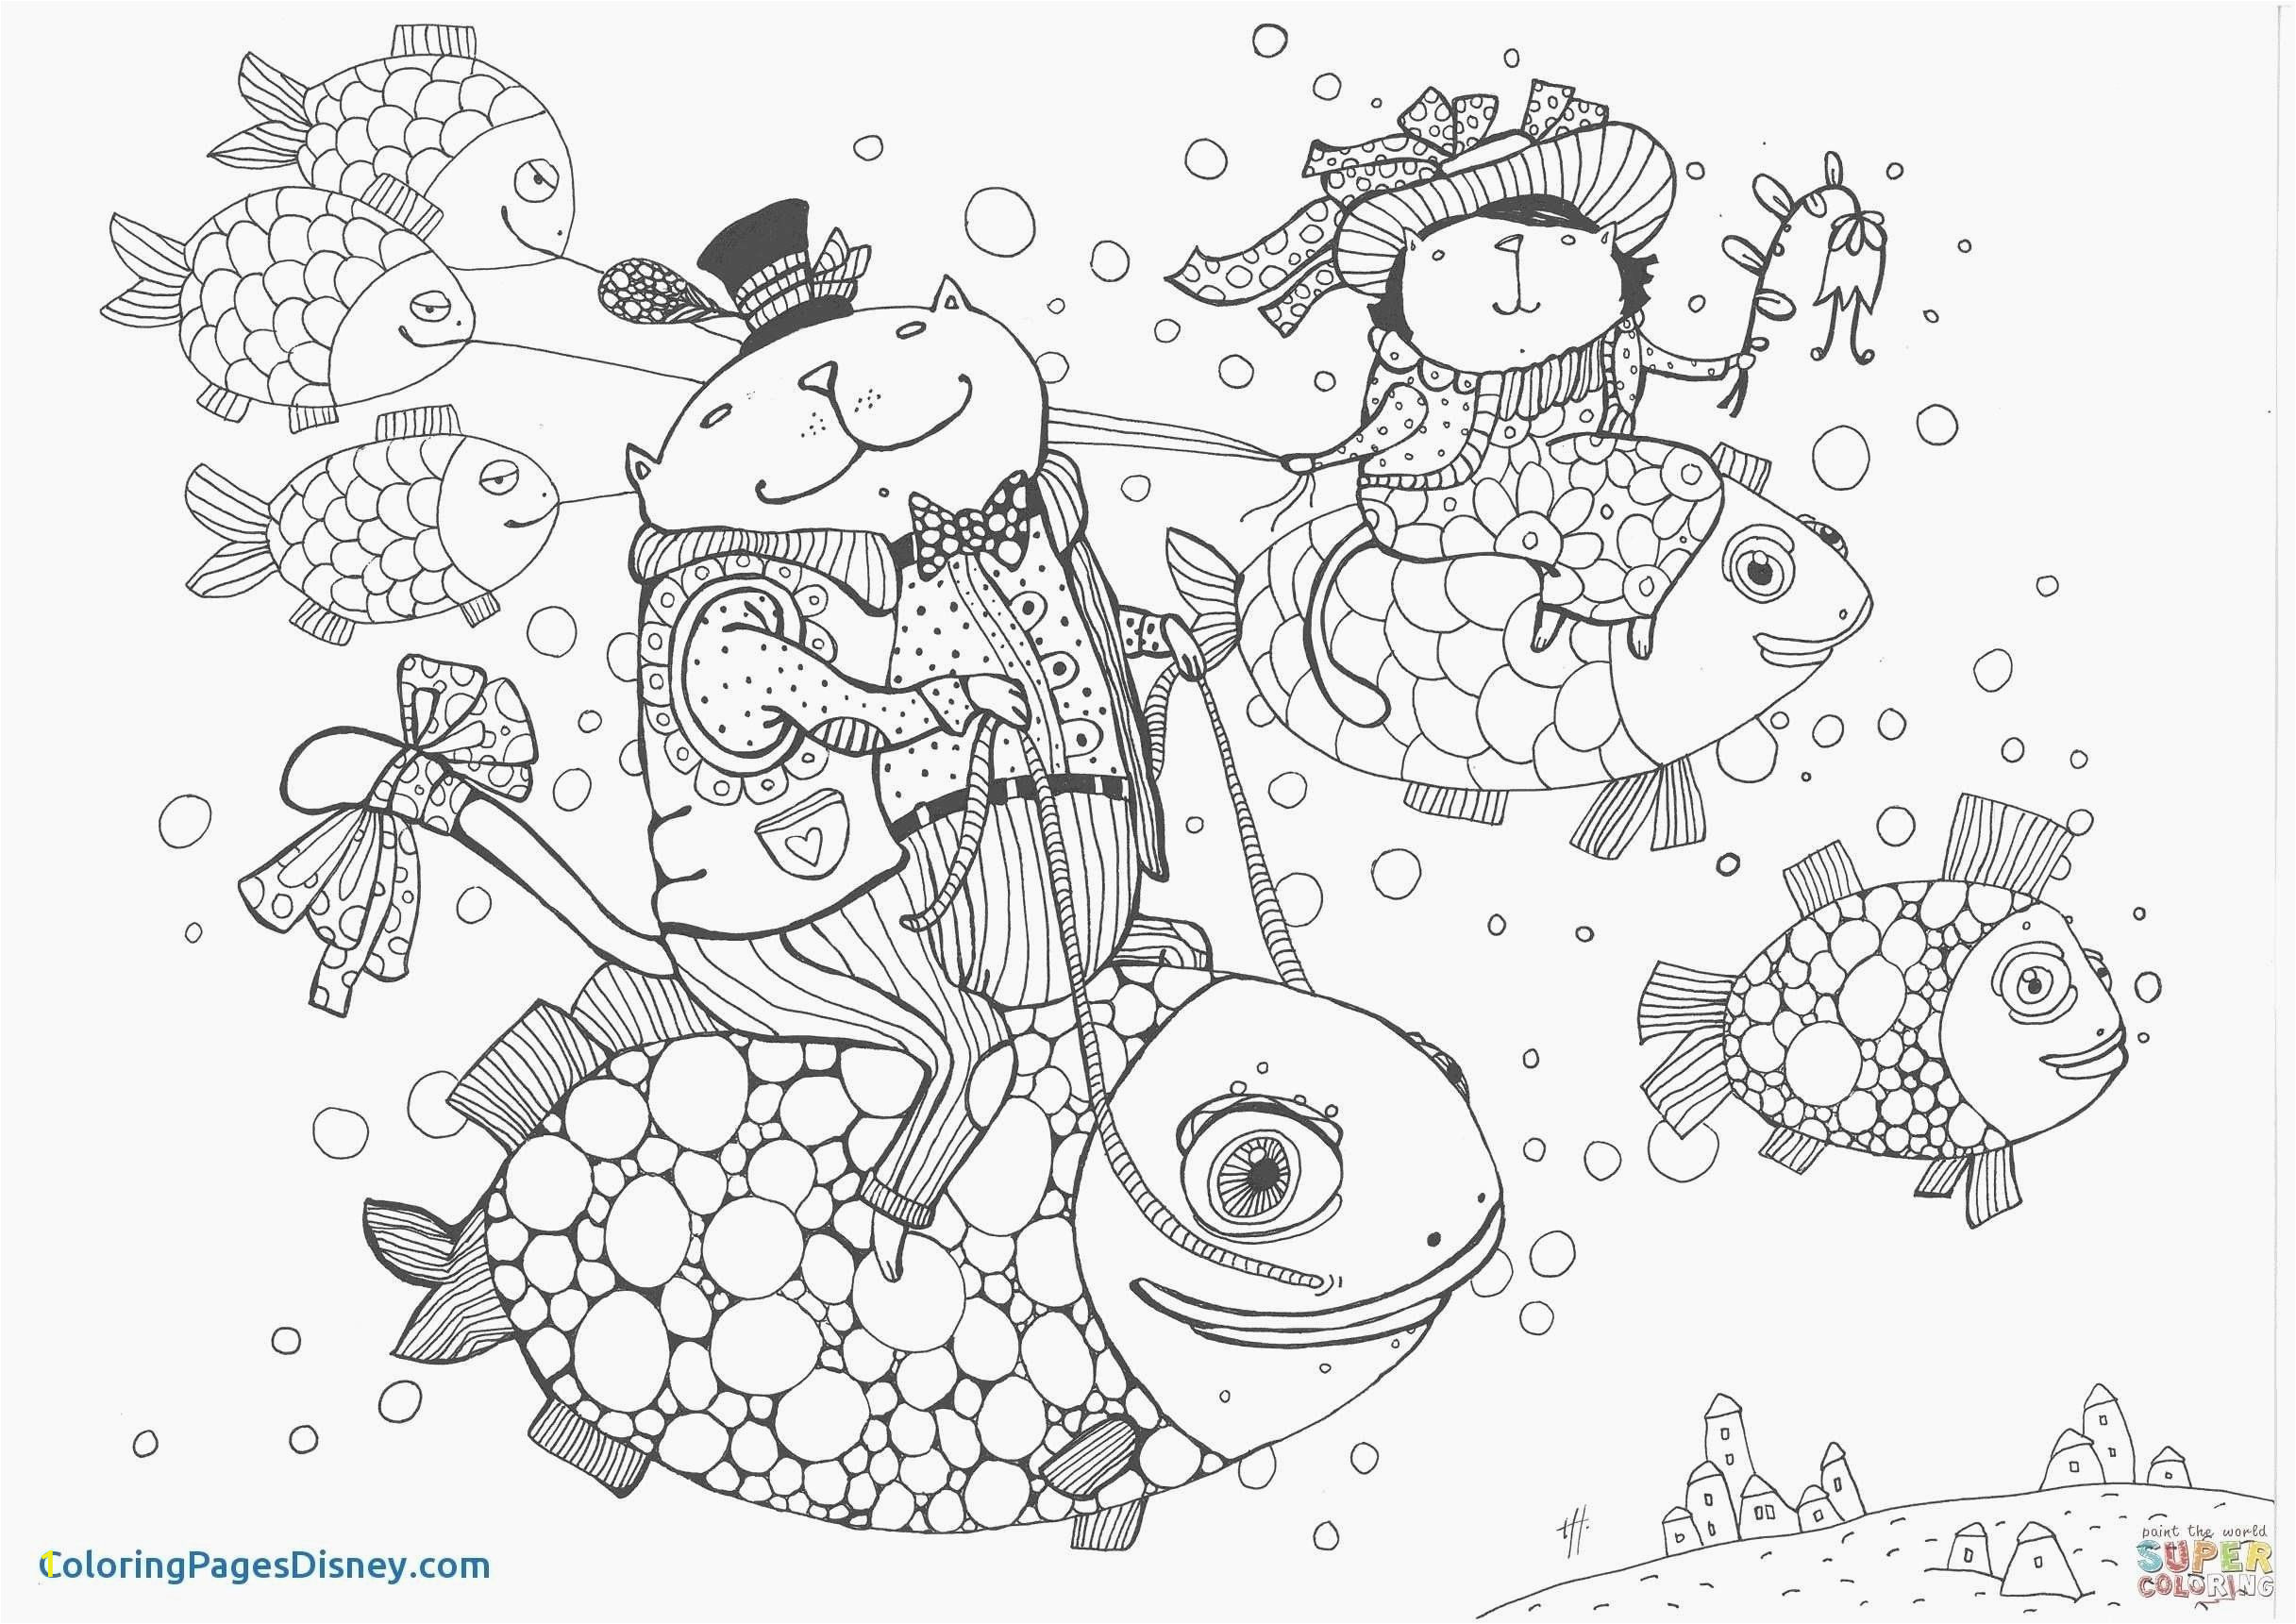 Coloring Pages Of Disney World Thanksgiving Coloring Pages Free Printable Awesome Coloring